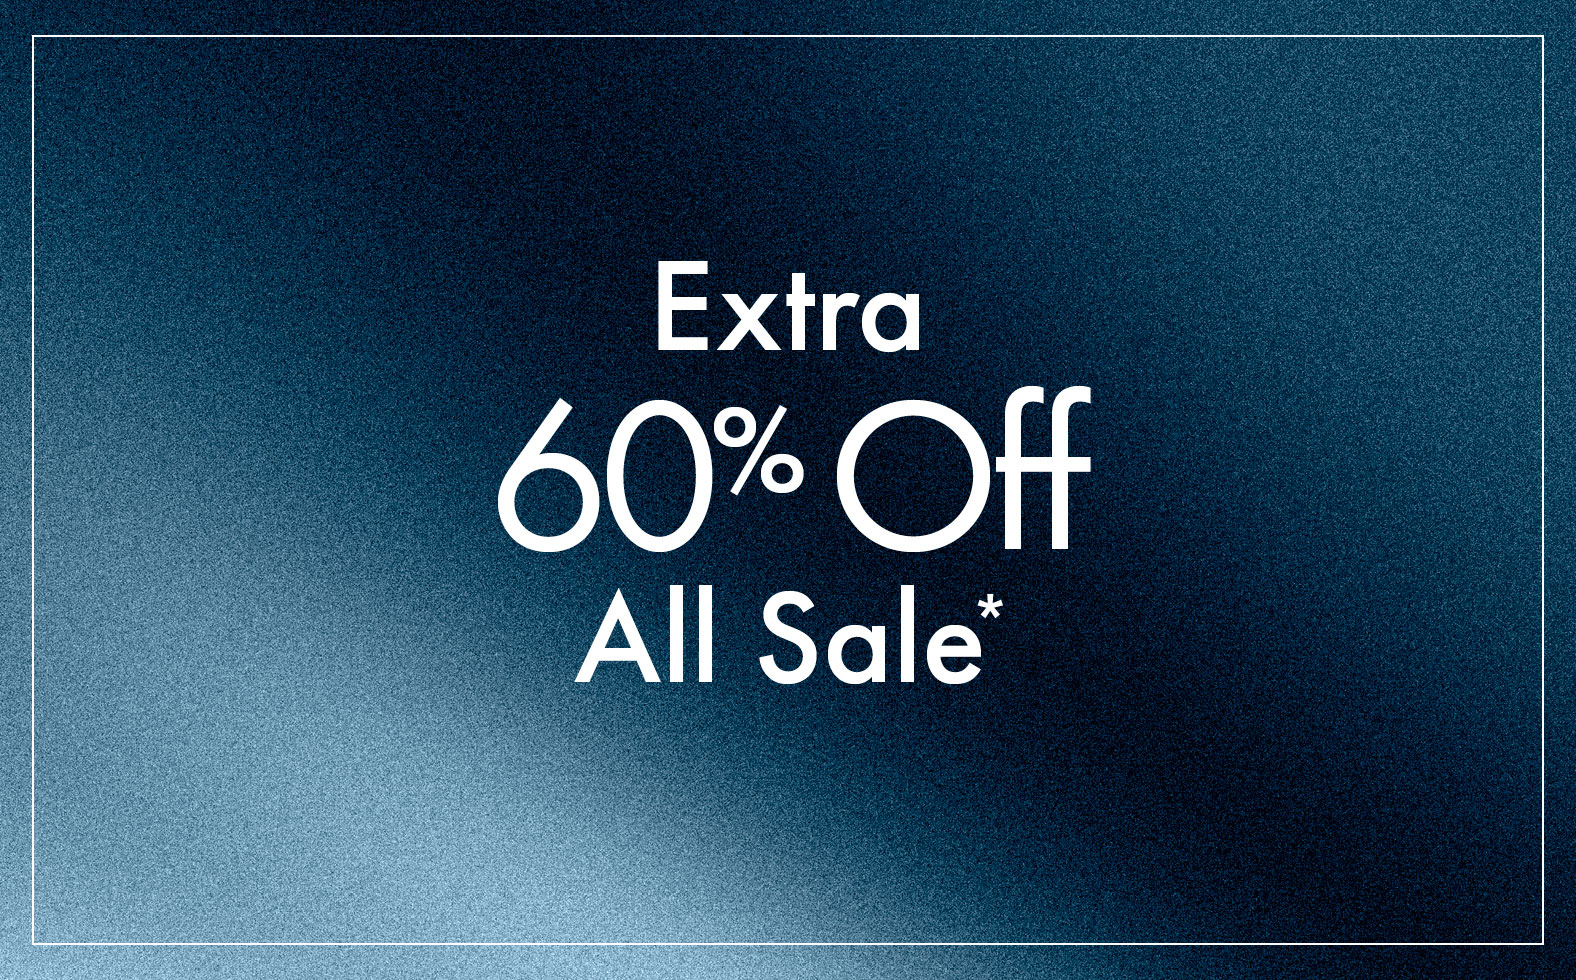 Extra 60% Off All Sale*